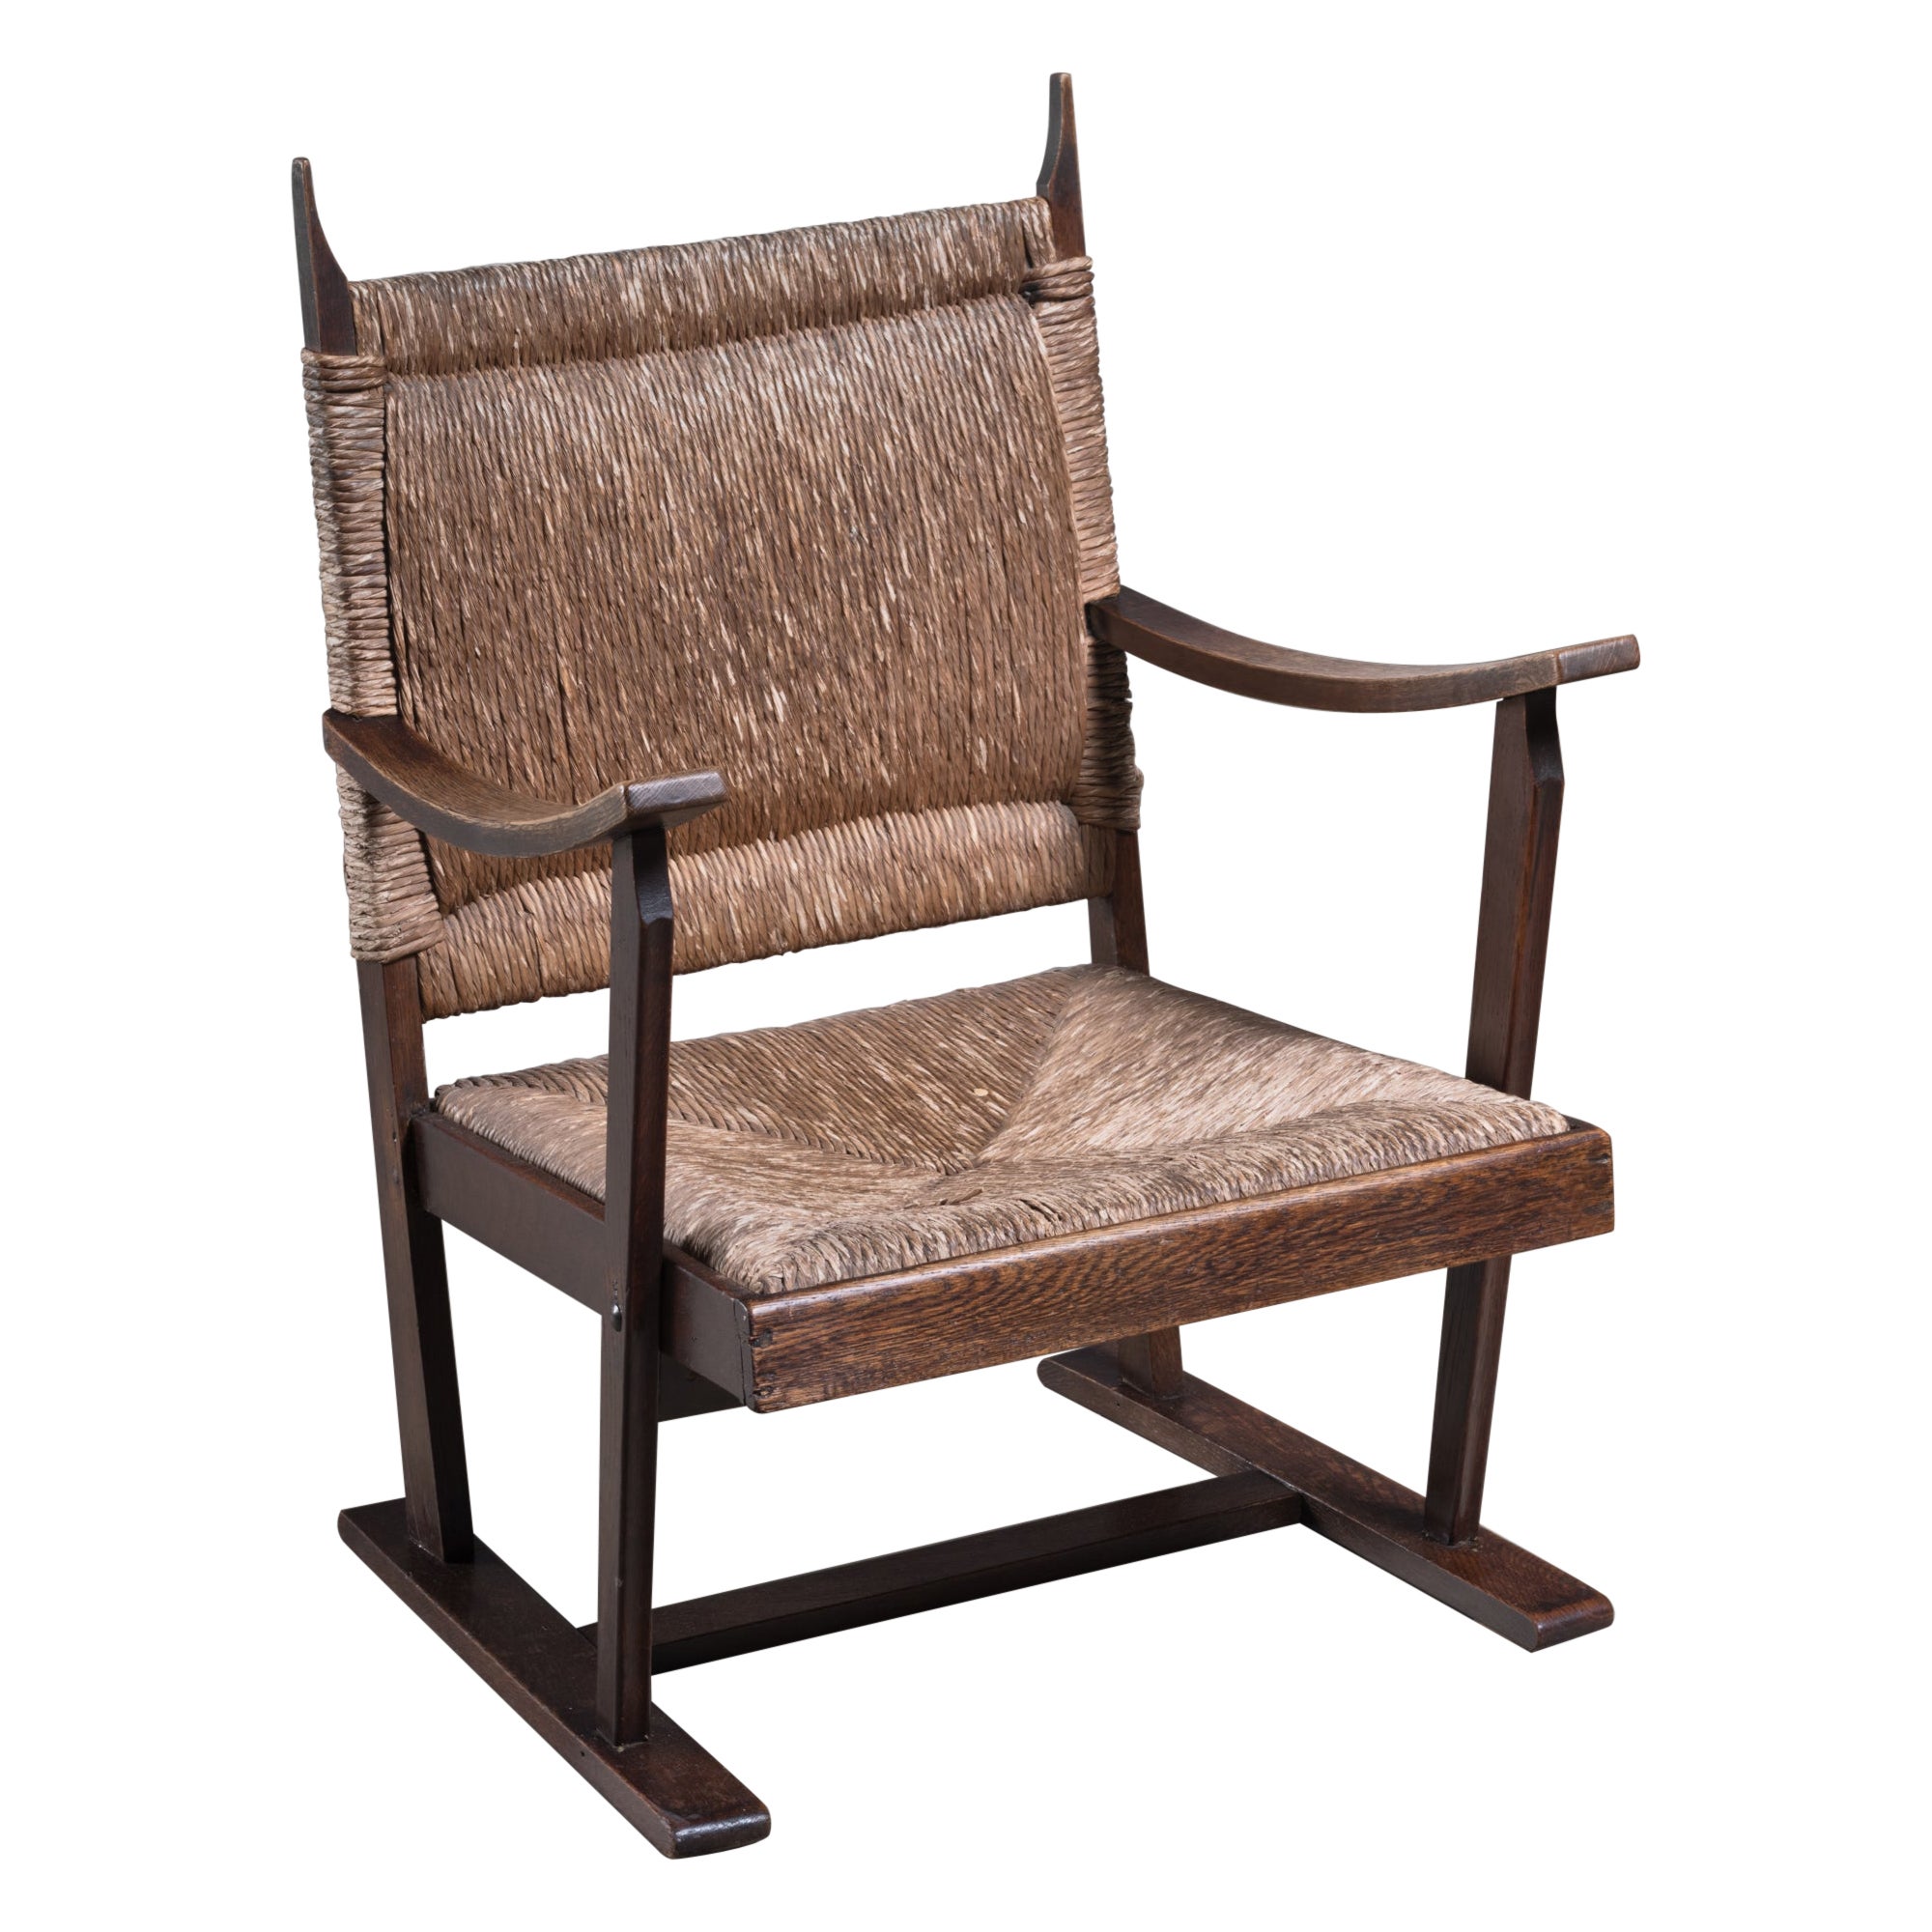 Bas Van Pelt Early Oak and Papercord Chair, Netherlands, 1920s